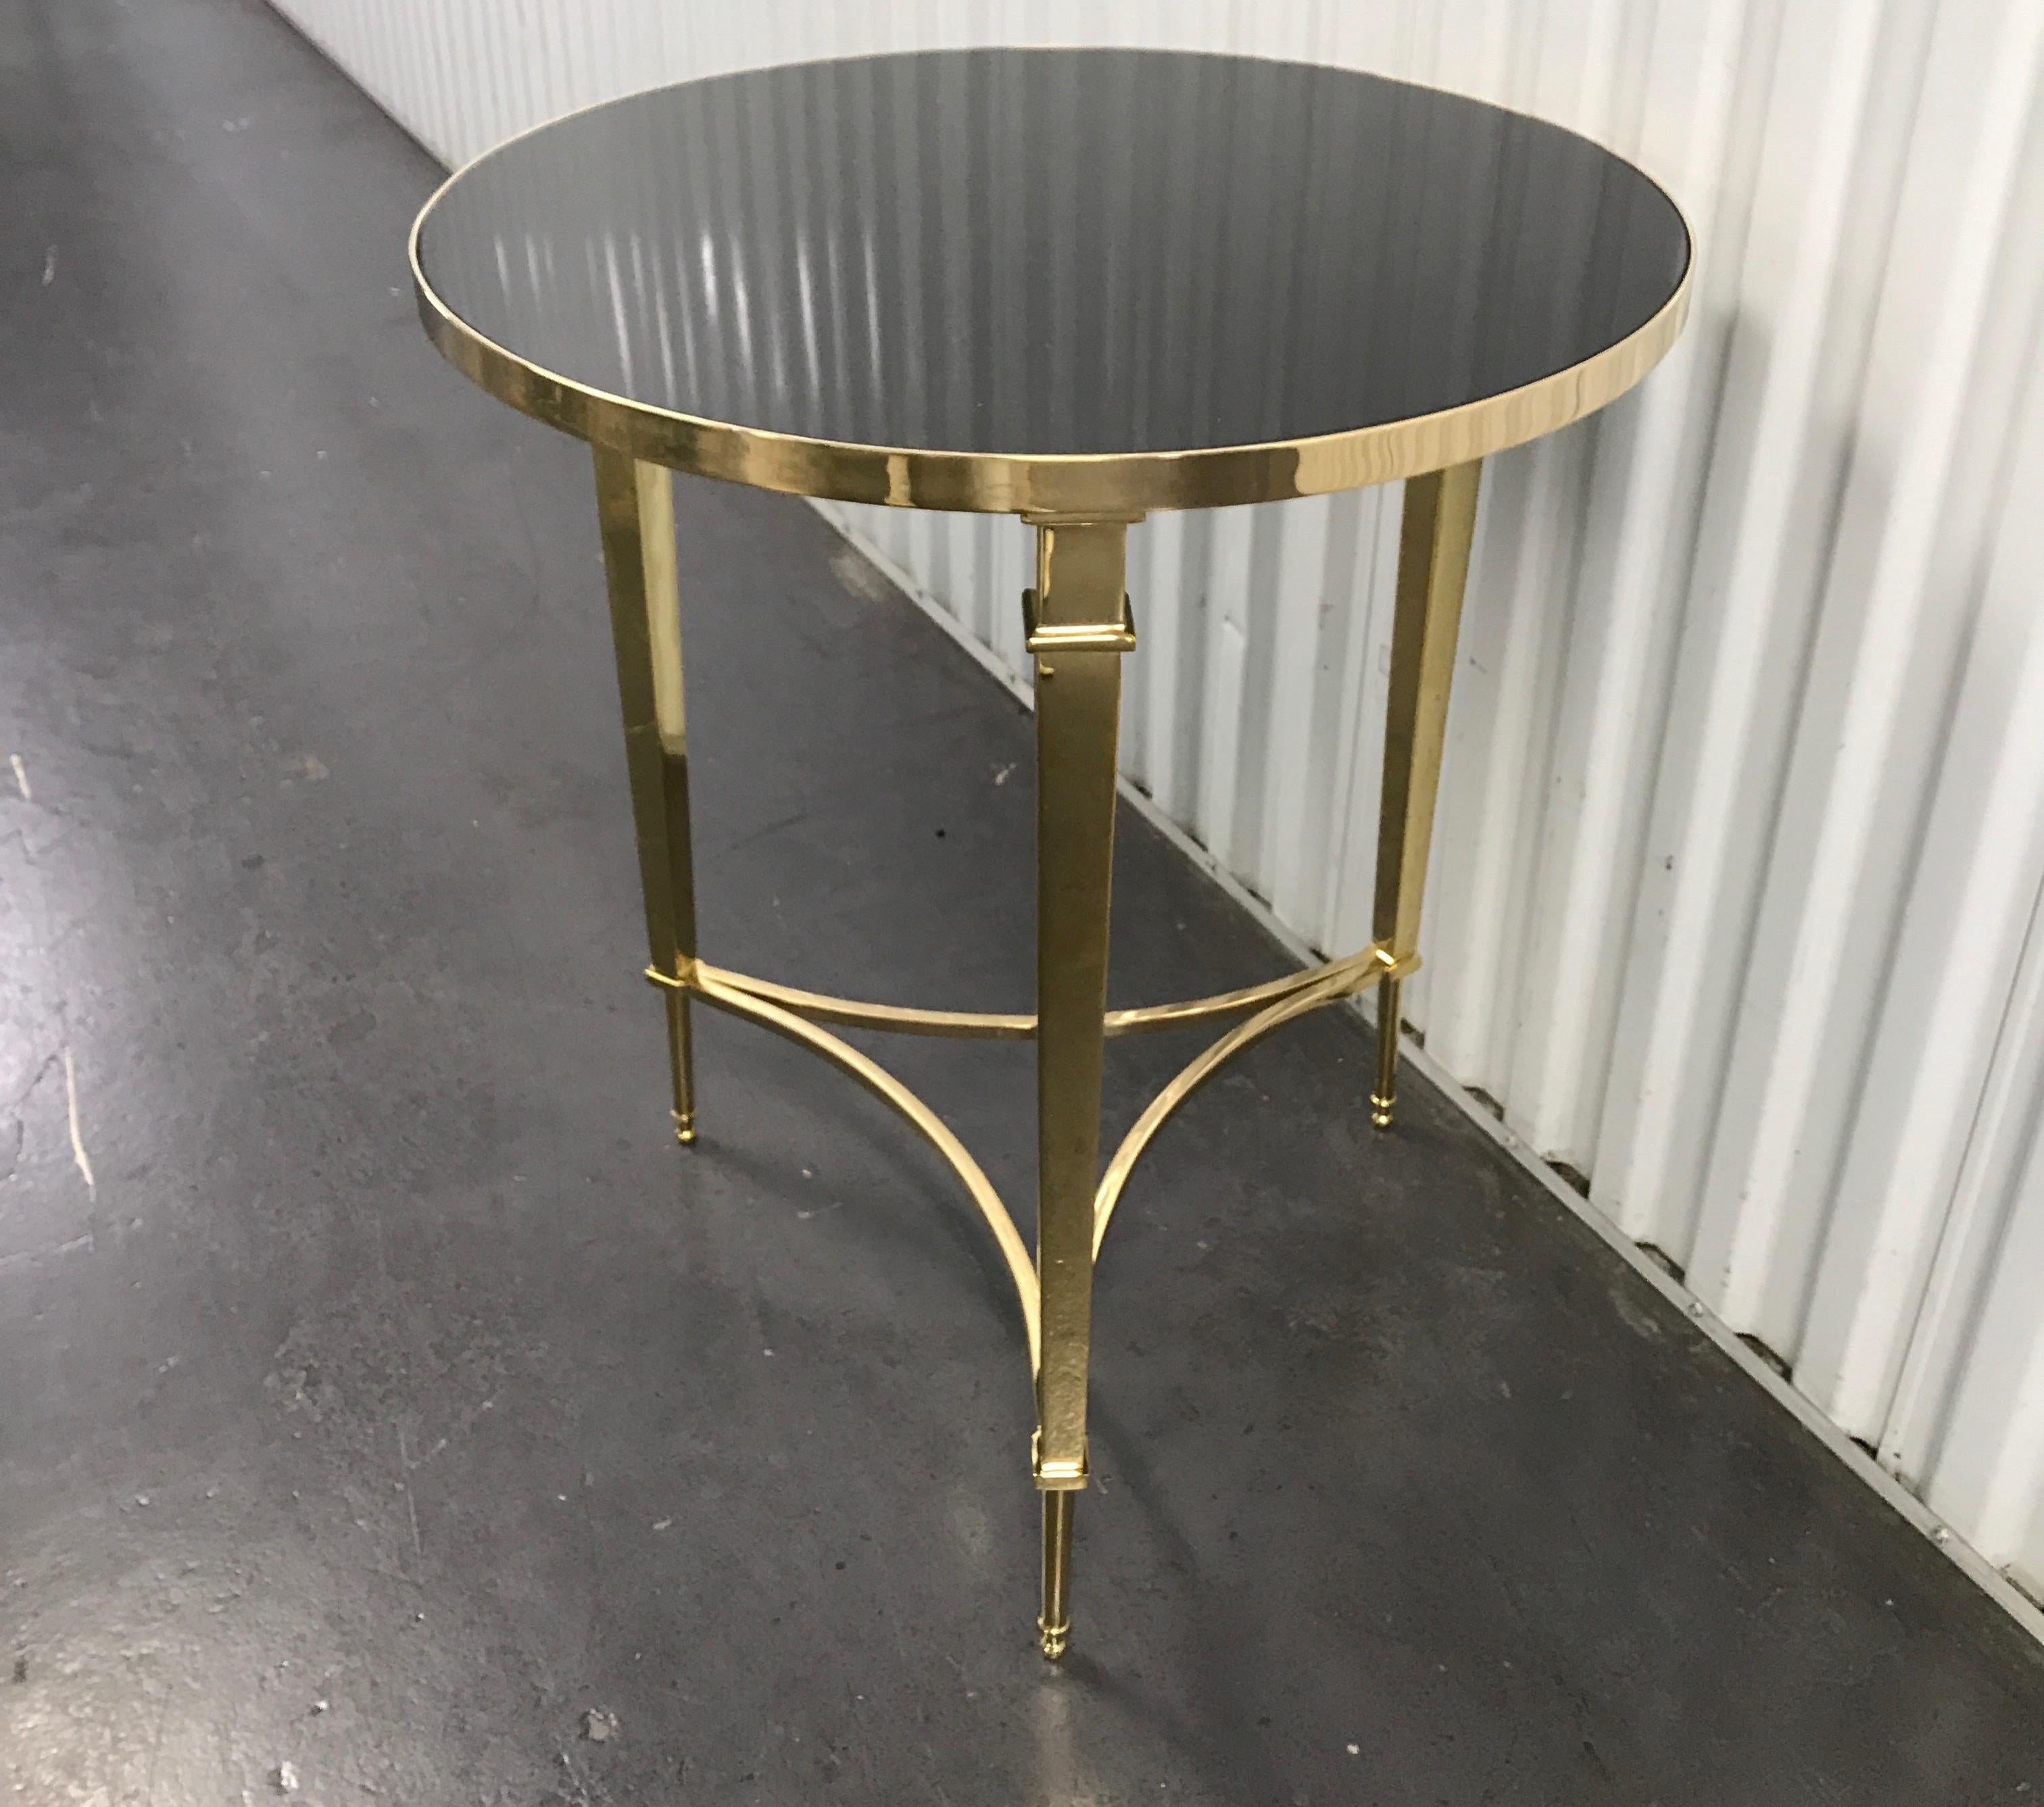 Black marble-top solid brass neoclassical style side table.